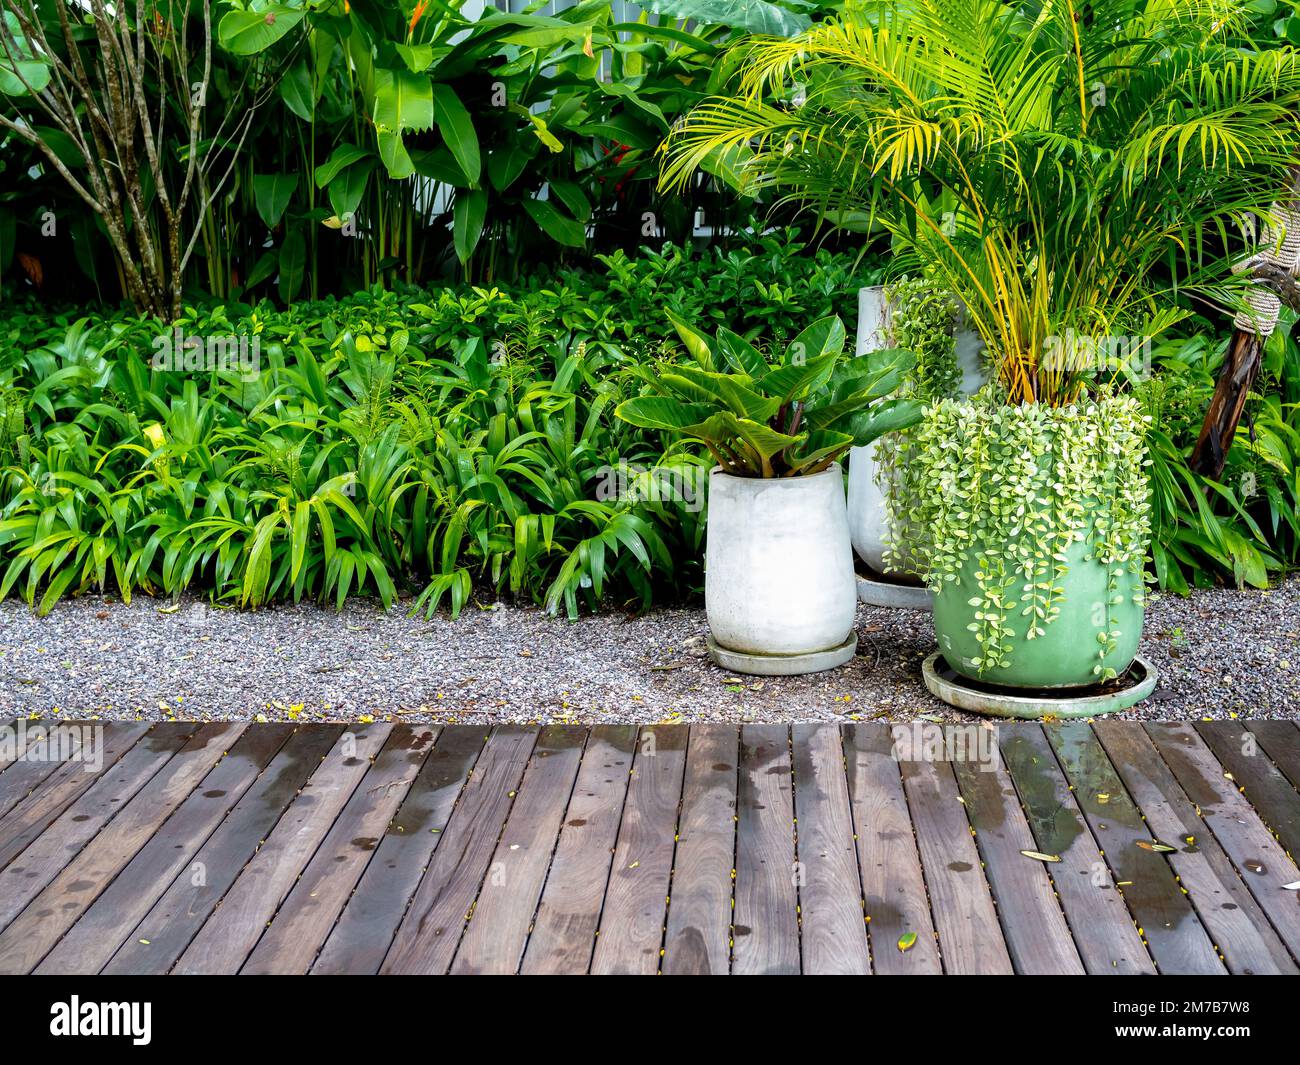 Big green ceramic pot with ivy plant and tropical palm tree near concrete pots with green leaves on gravel ground near greenery garden and wet wooden Stock Photo